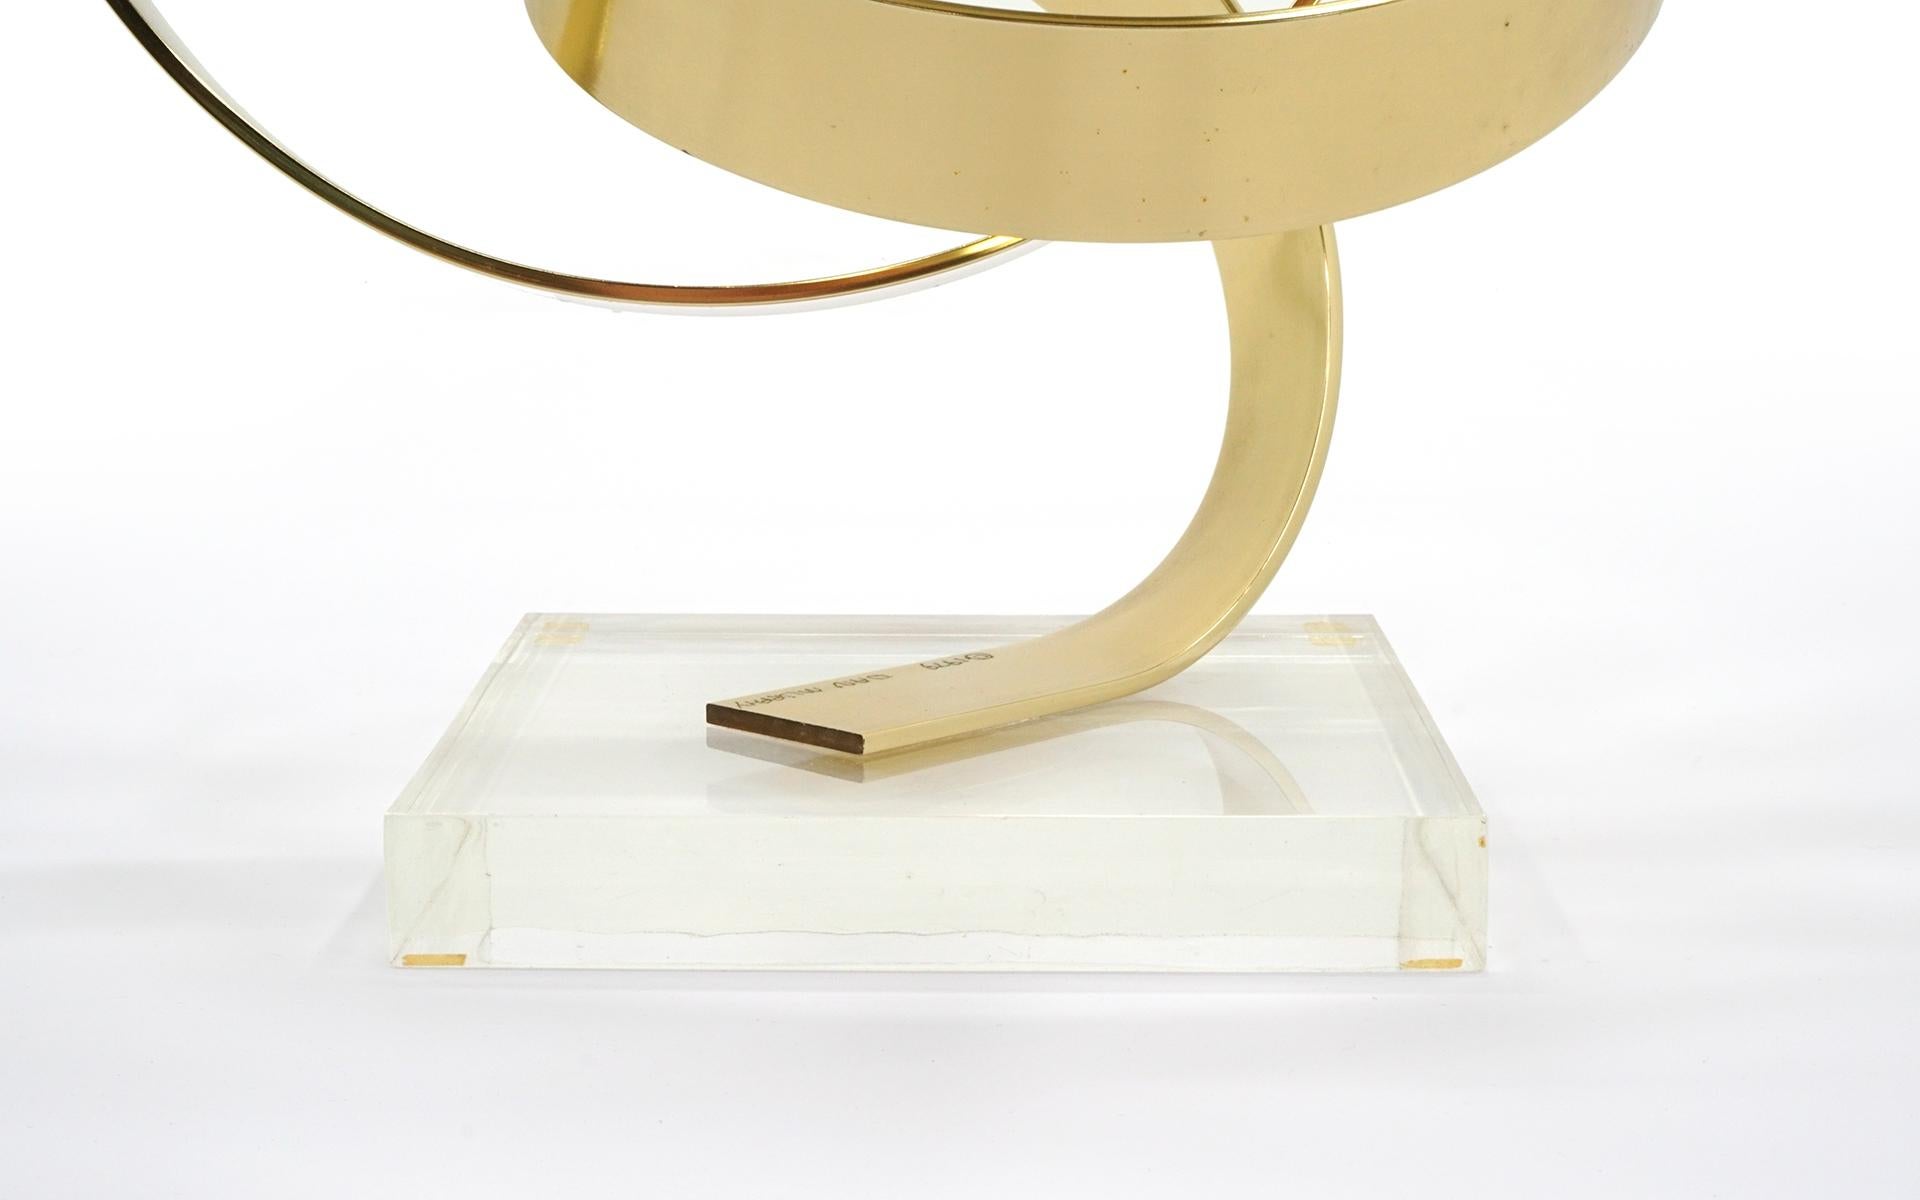 Brass and Lucite Table Top Abstract Sculpture, Signed & Dated, Dan Murphy, 1979 In Good Condition For Sale In Kansas City, MO